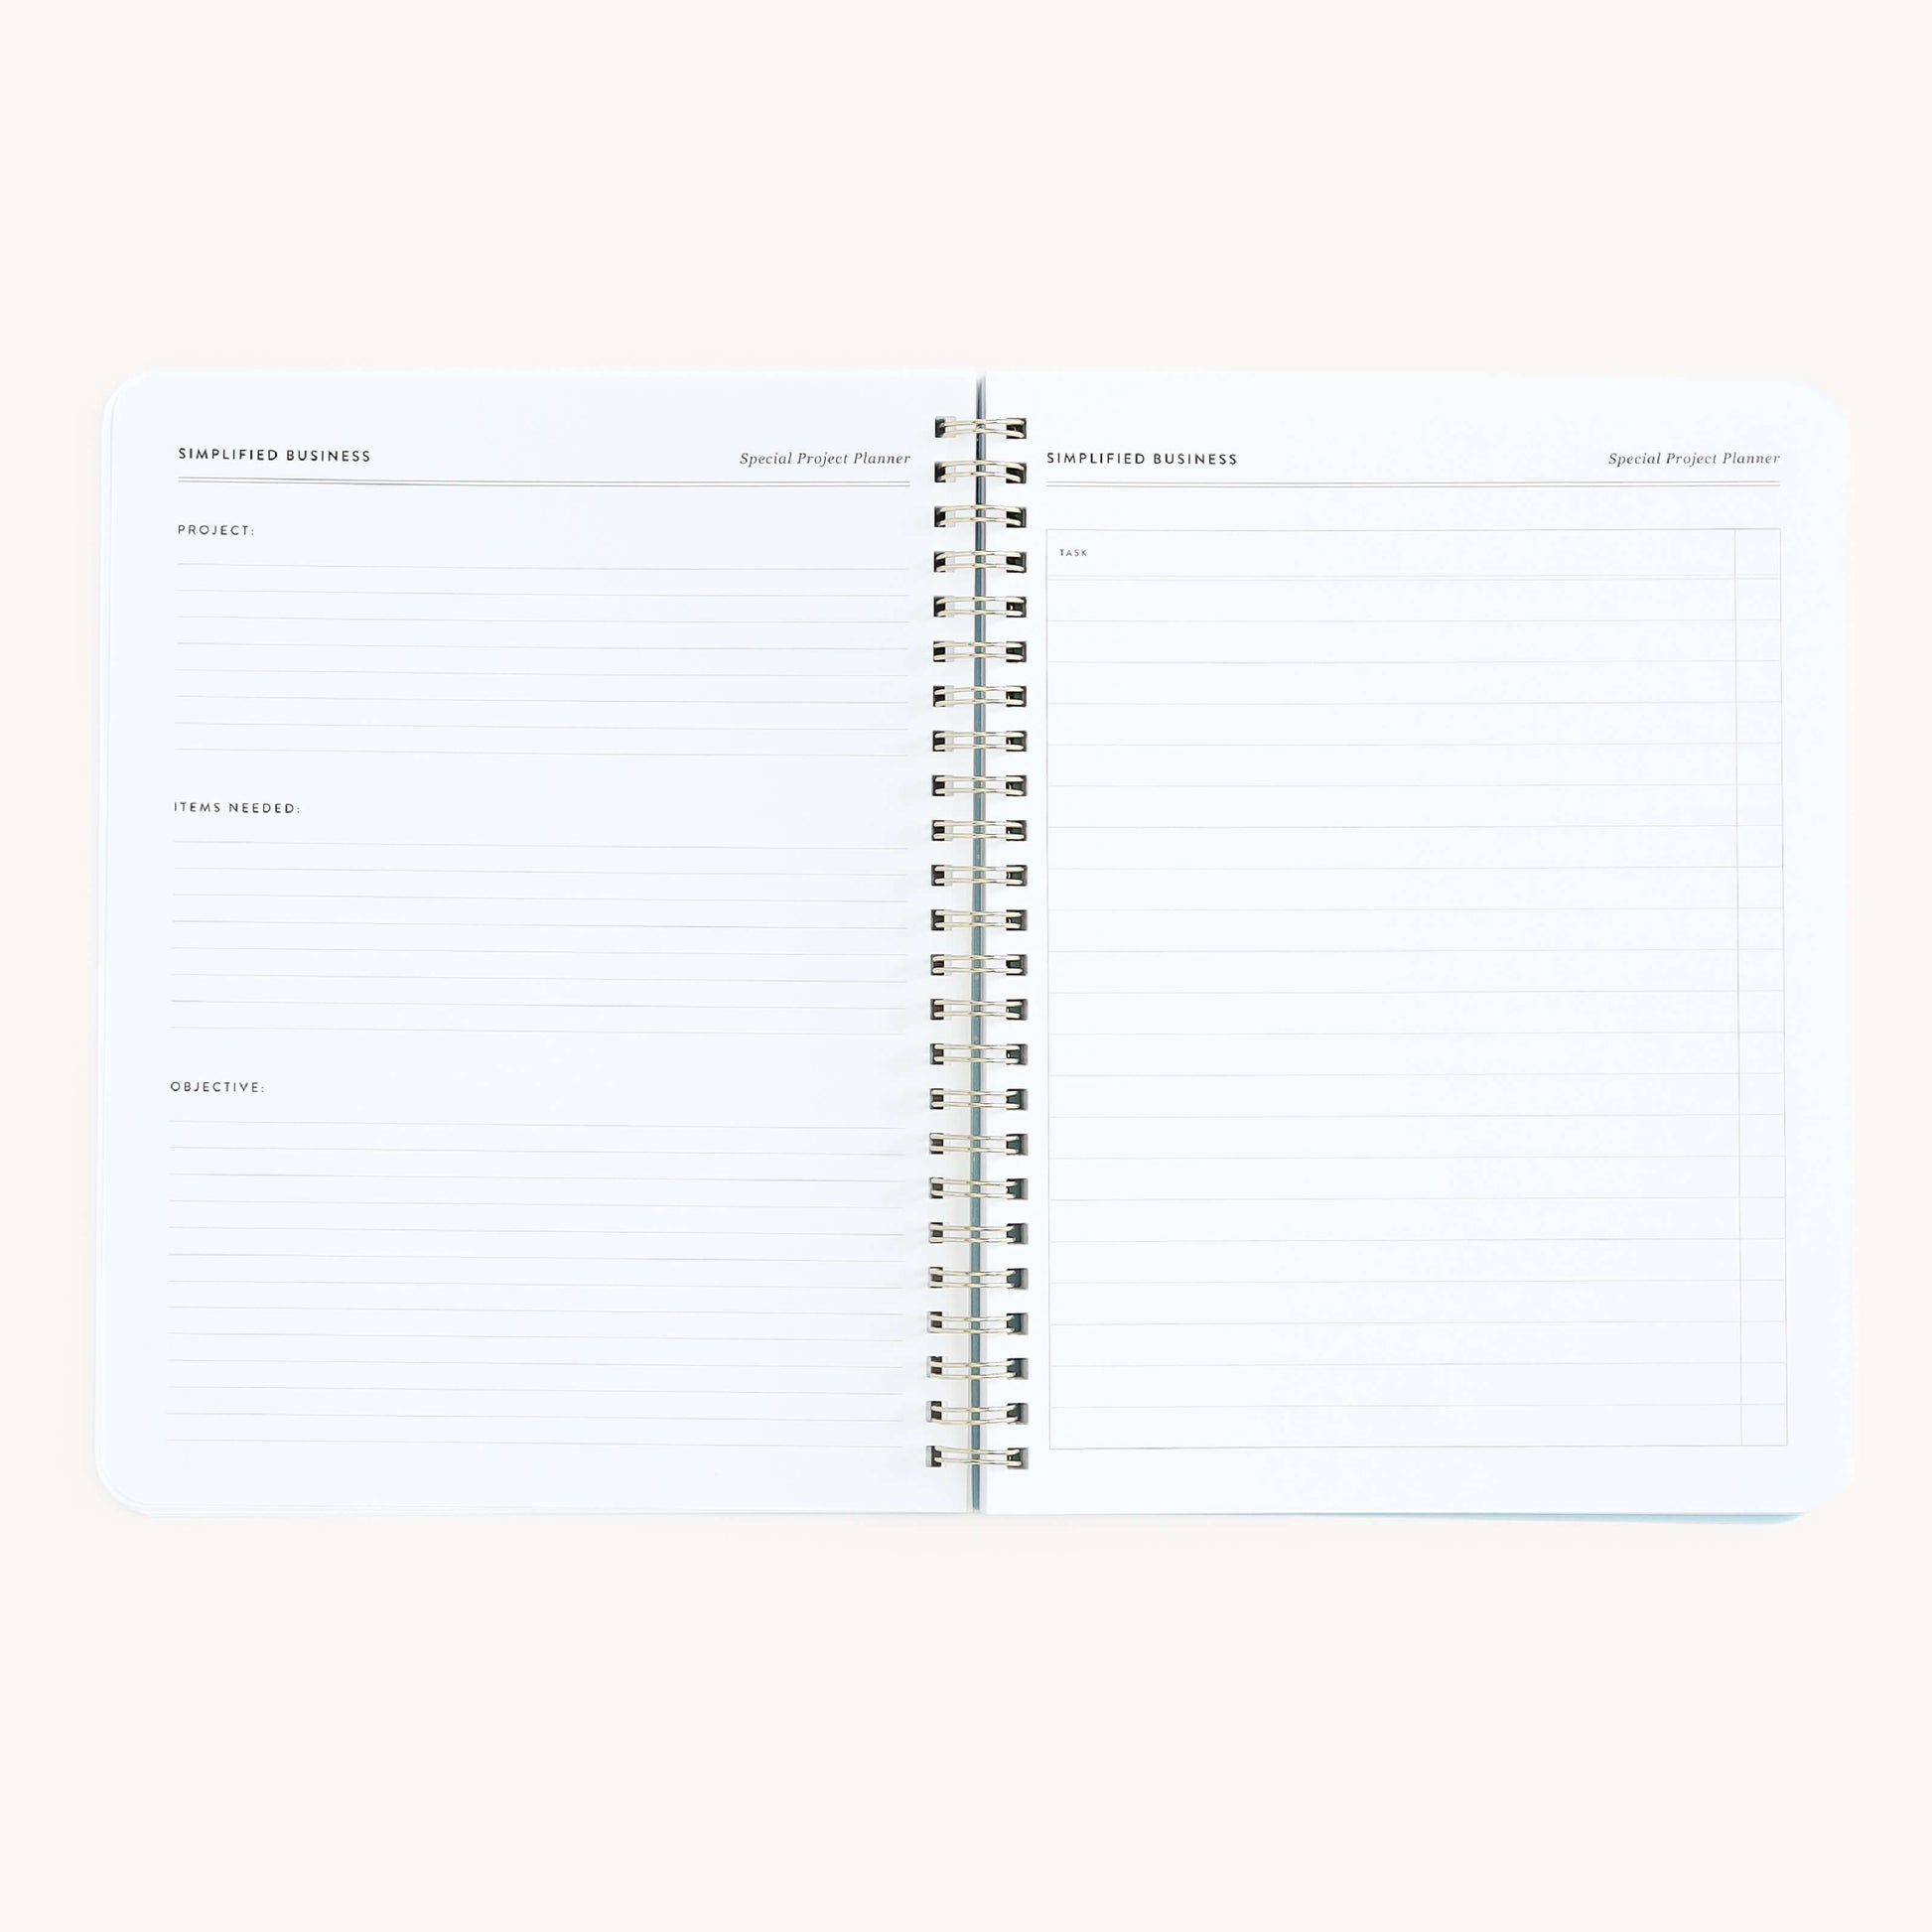 Special Project Planner